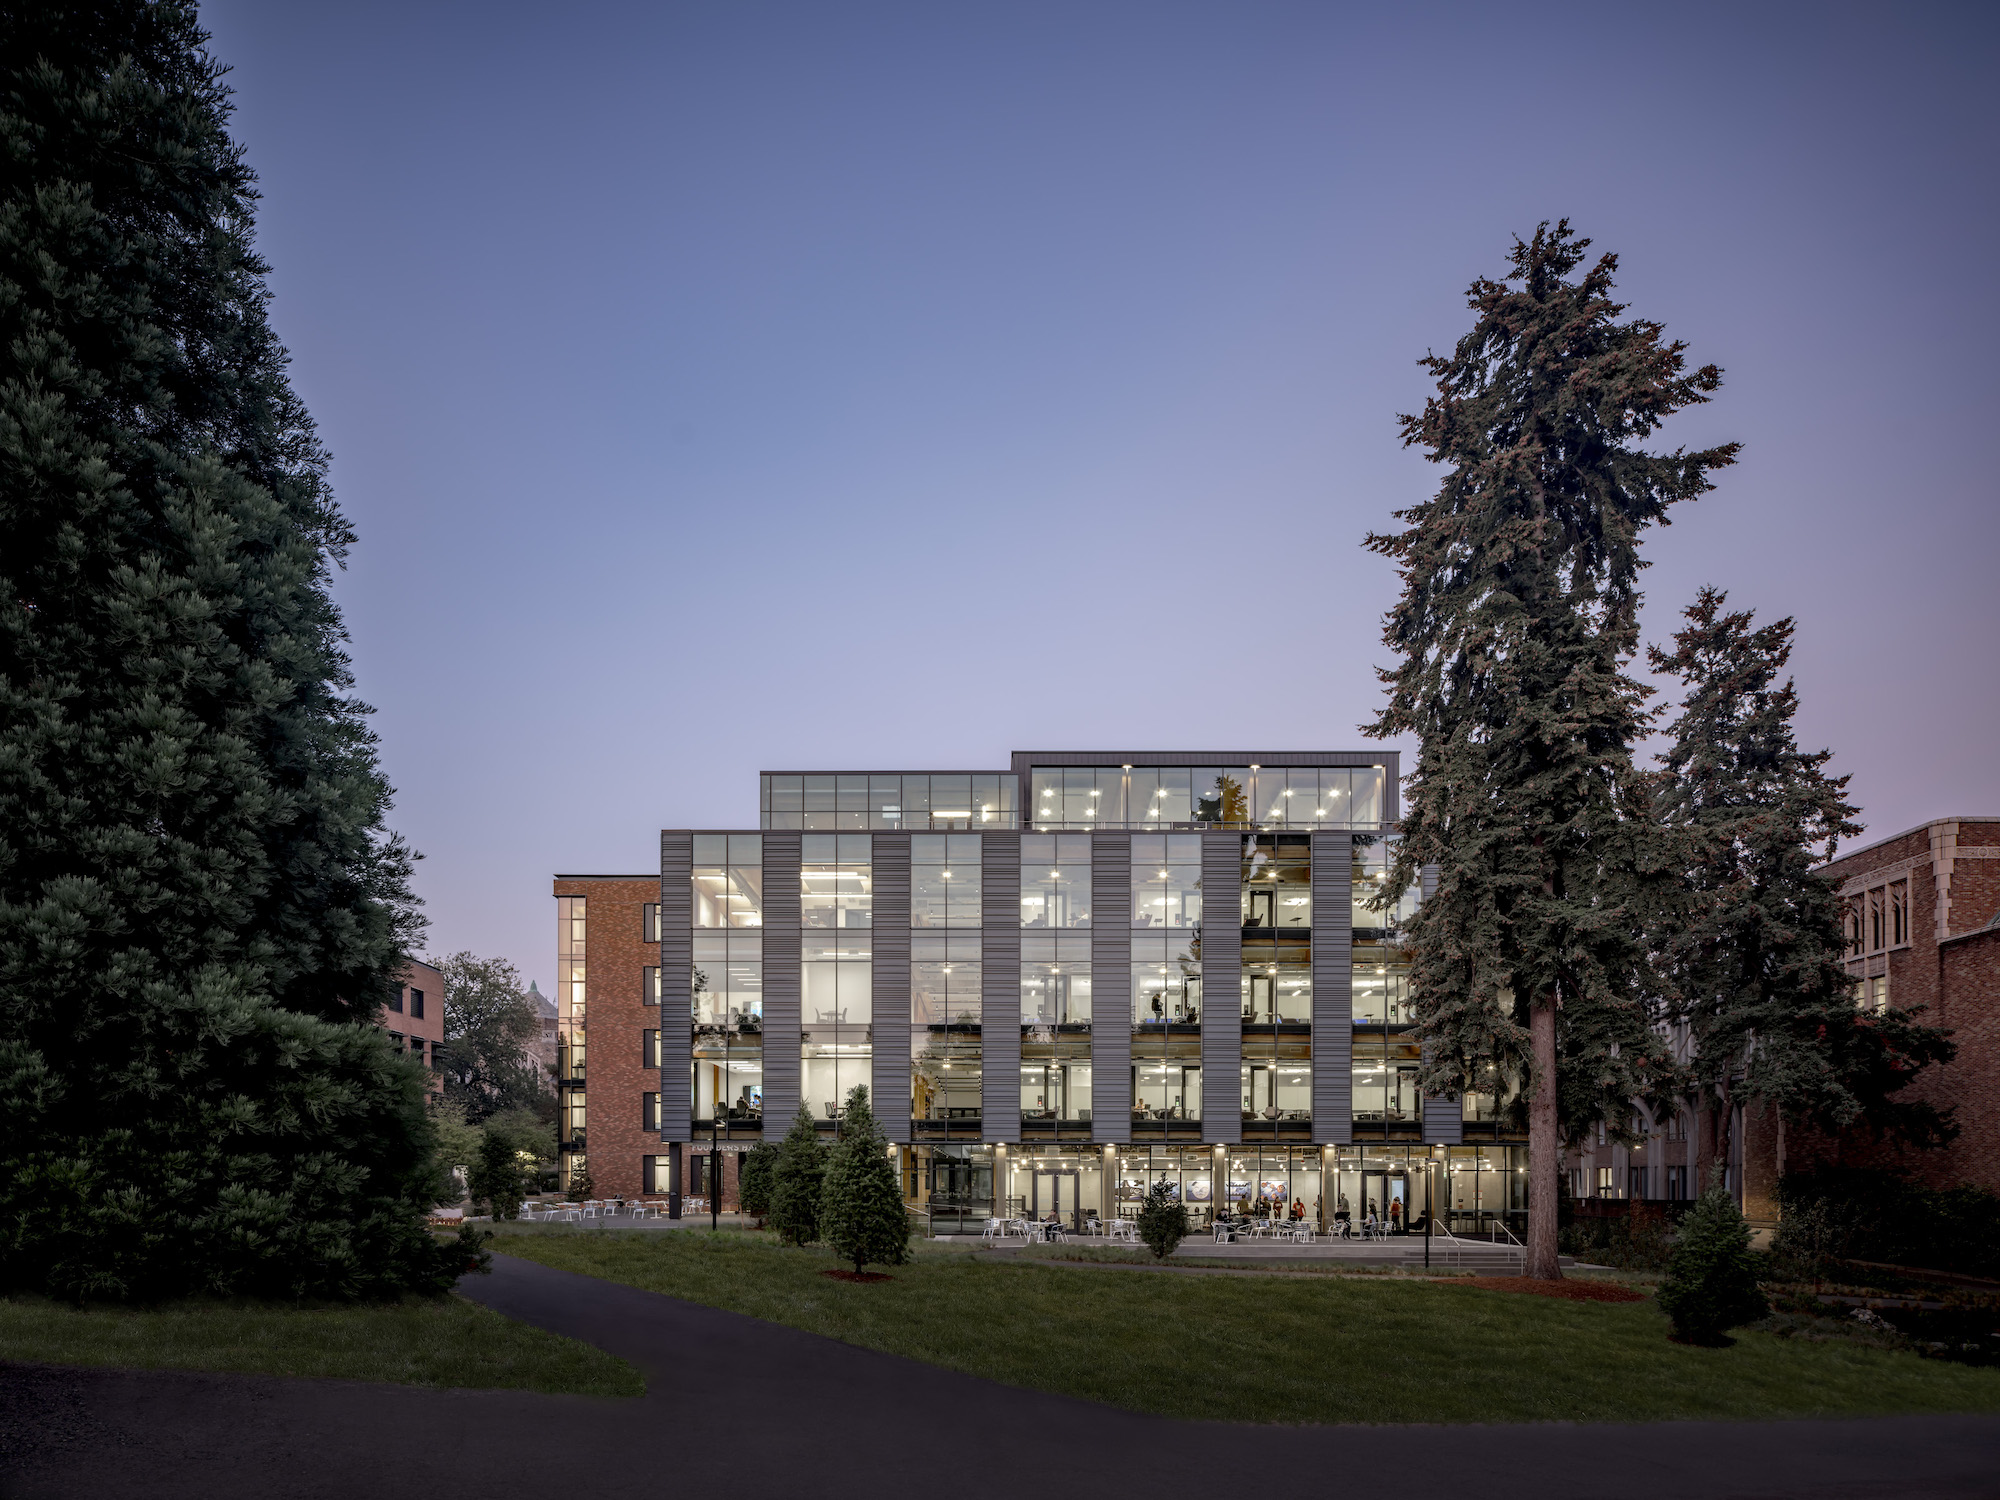 LMN Architects designed the mass timber Michael G. Foster School of Business Founders Hall at the University of Washington 2